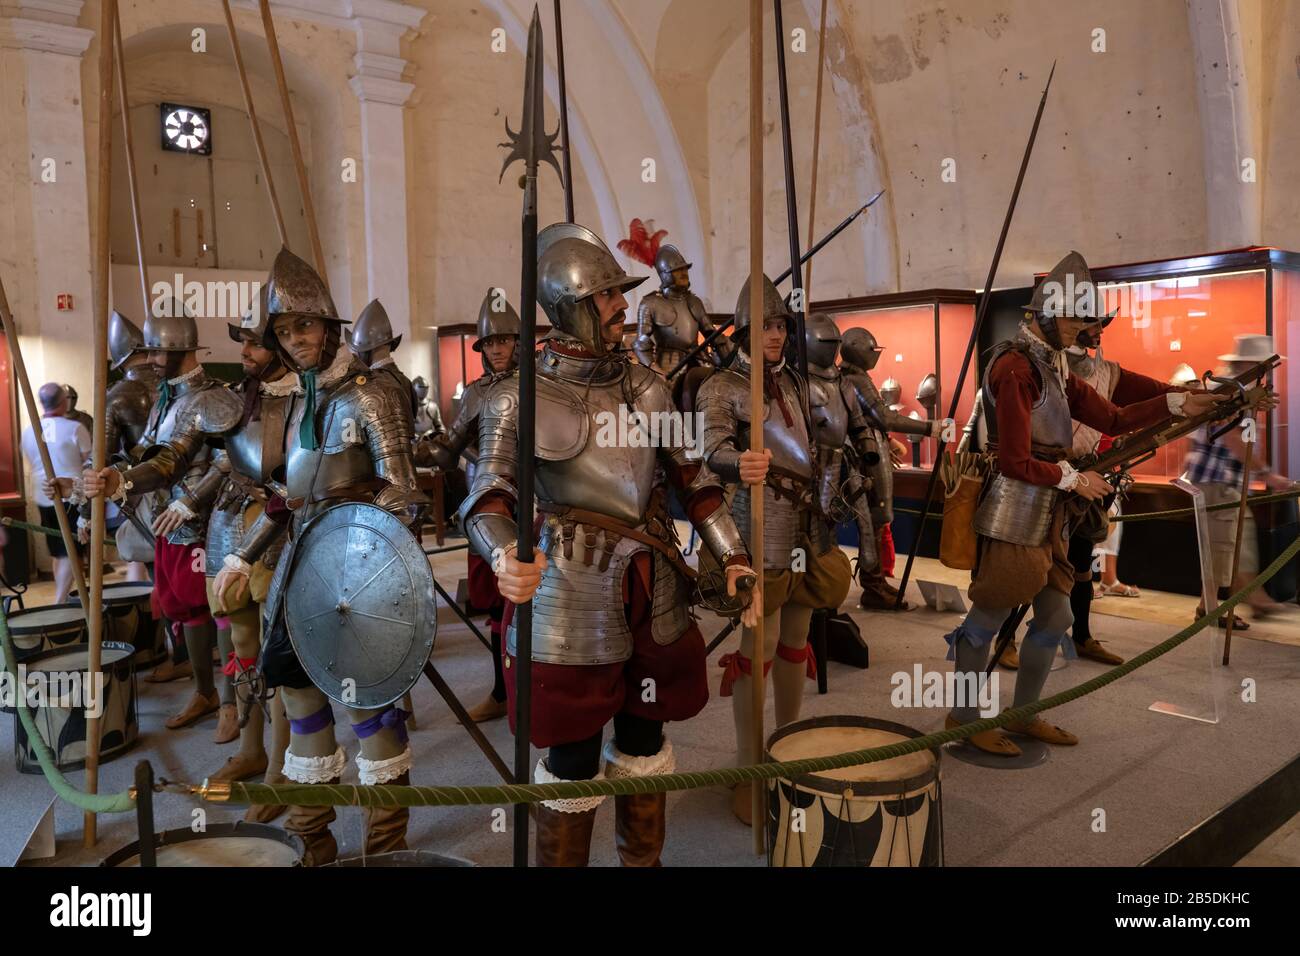 The Palace Armoury museum in the Grandmaster Palace interior in Valletta, Malta Stock Photo